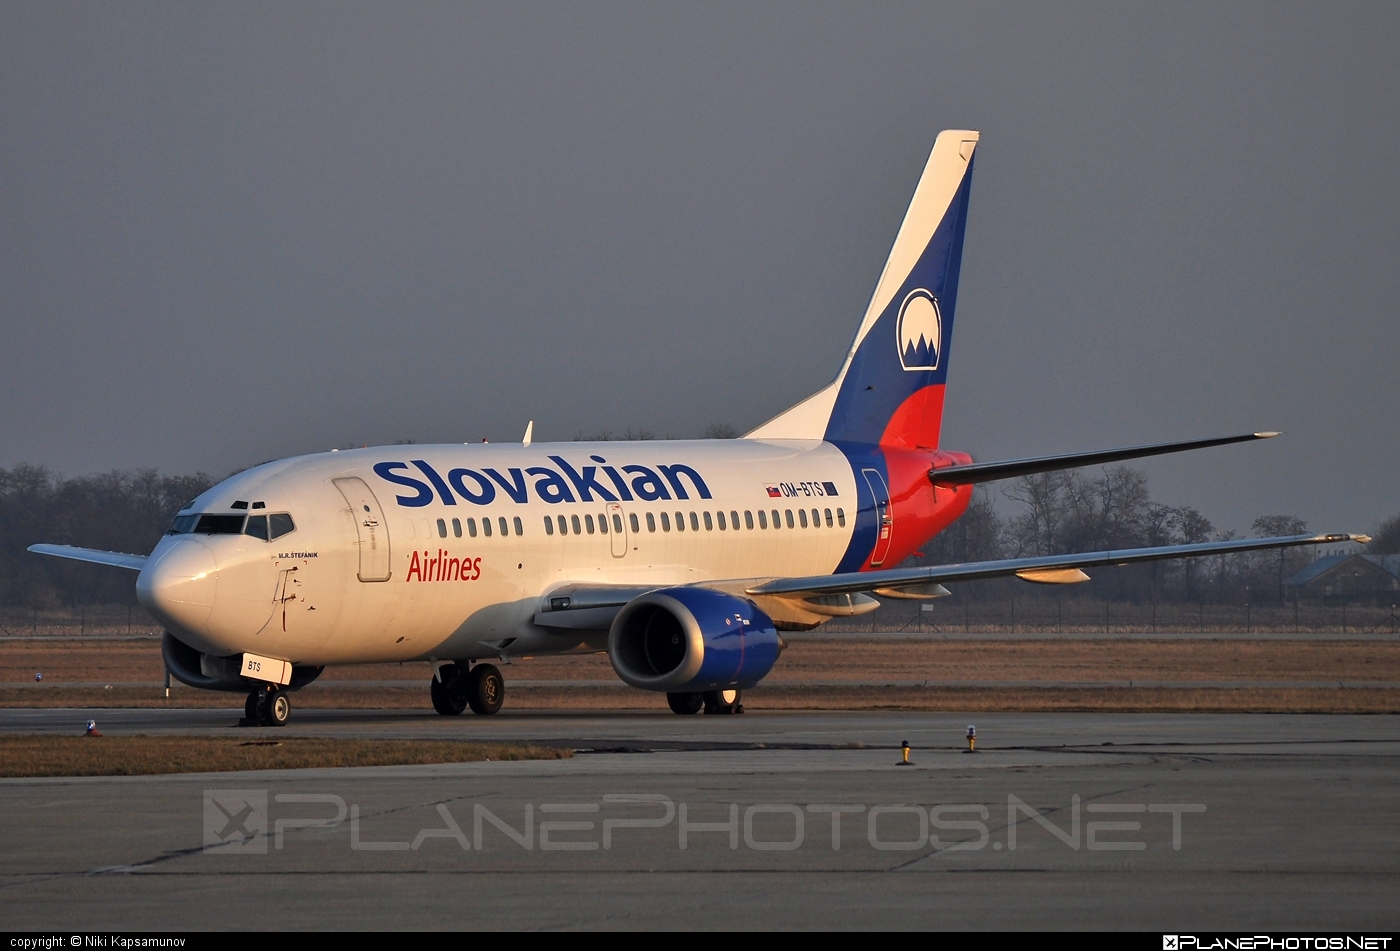 Boeing 737-500 - OM-BTS operated by Slovakian Airlines #b737 #boeing #boeing737